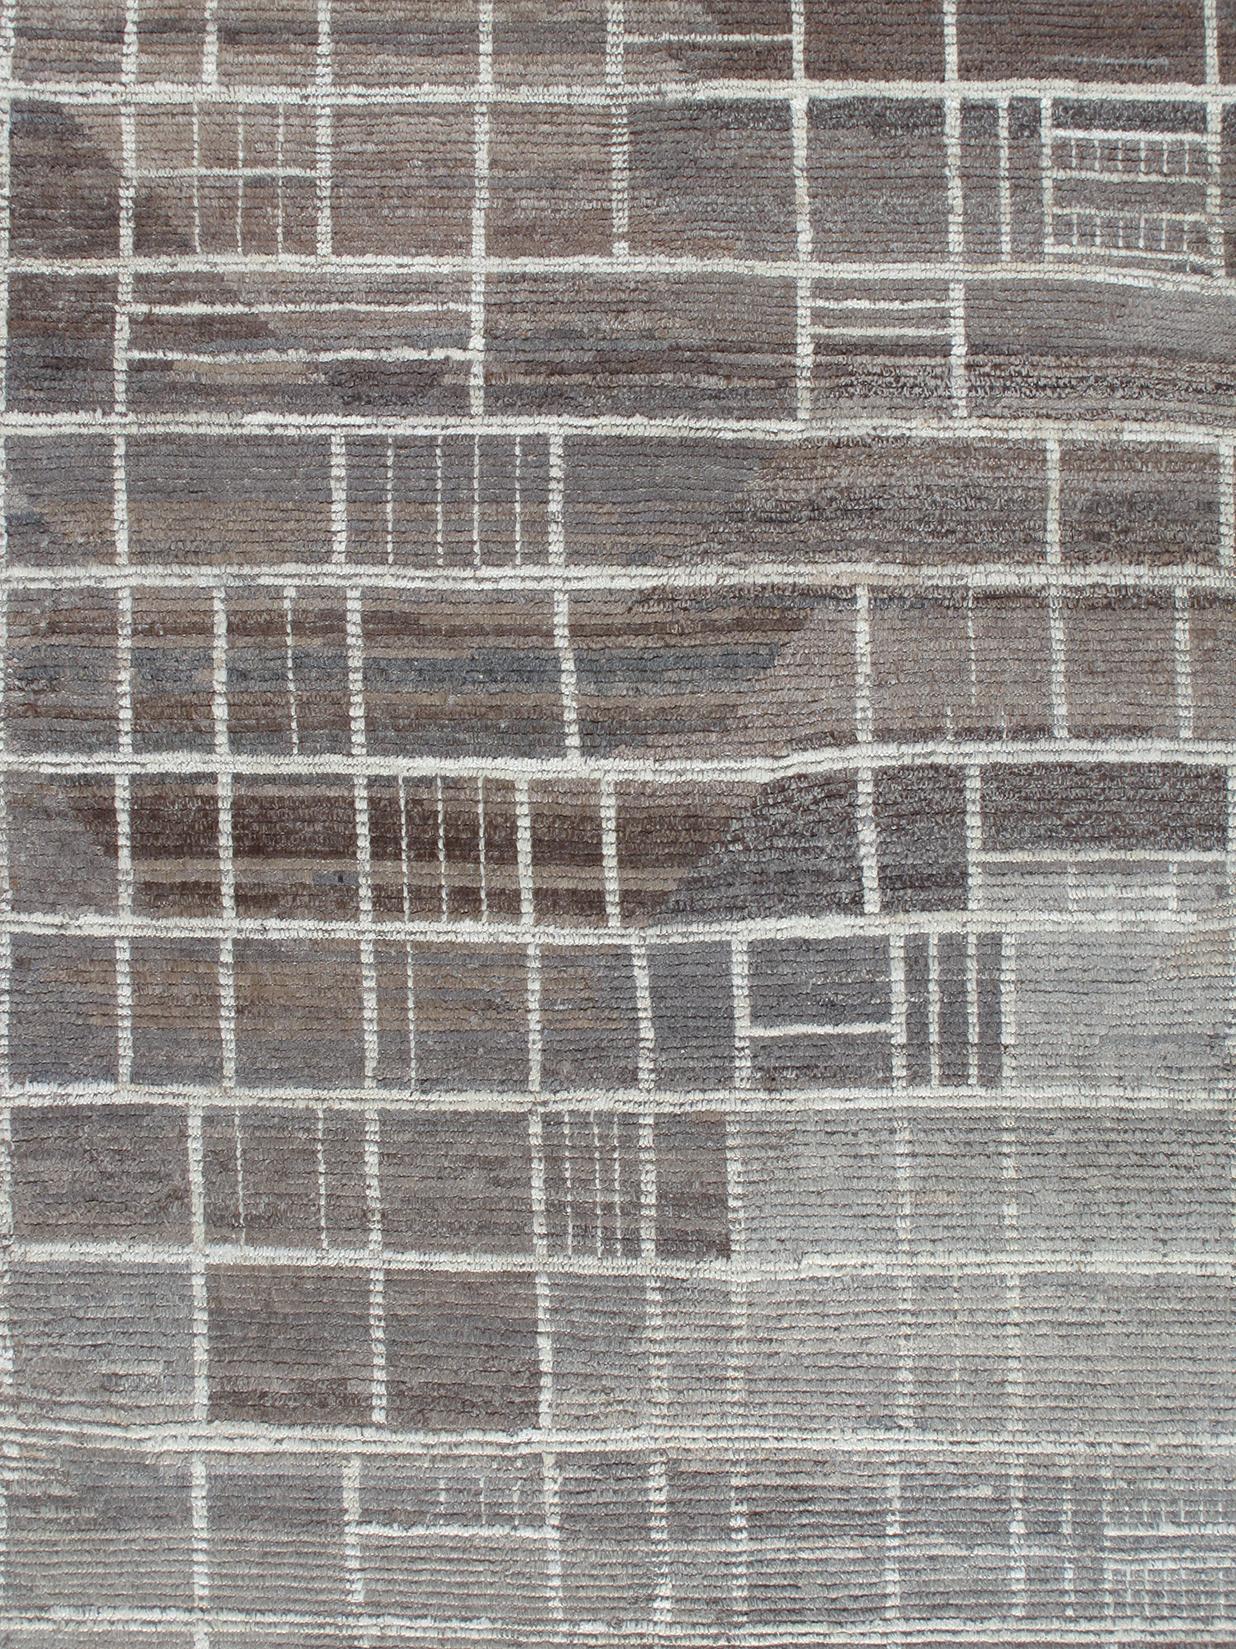 Our Tetris rug is handknotted from the finest, hand-carded, hand-spun, natural wool. The earthy natural tones woven with cool grey shades offer a perfect balance to any room. Available in custom colors and sizes upon request.